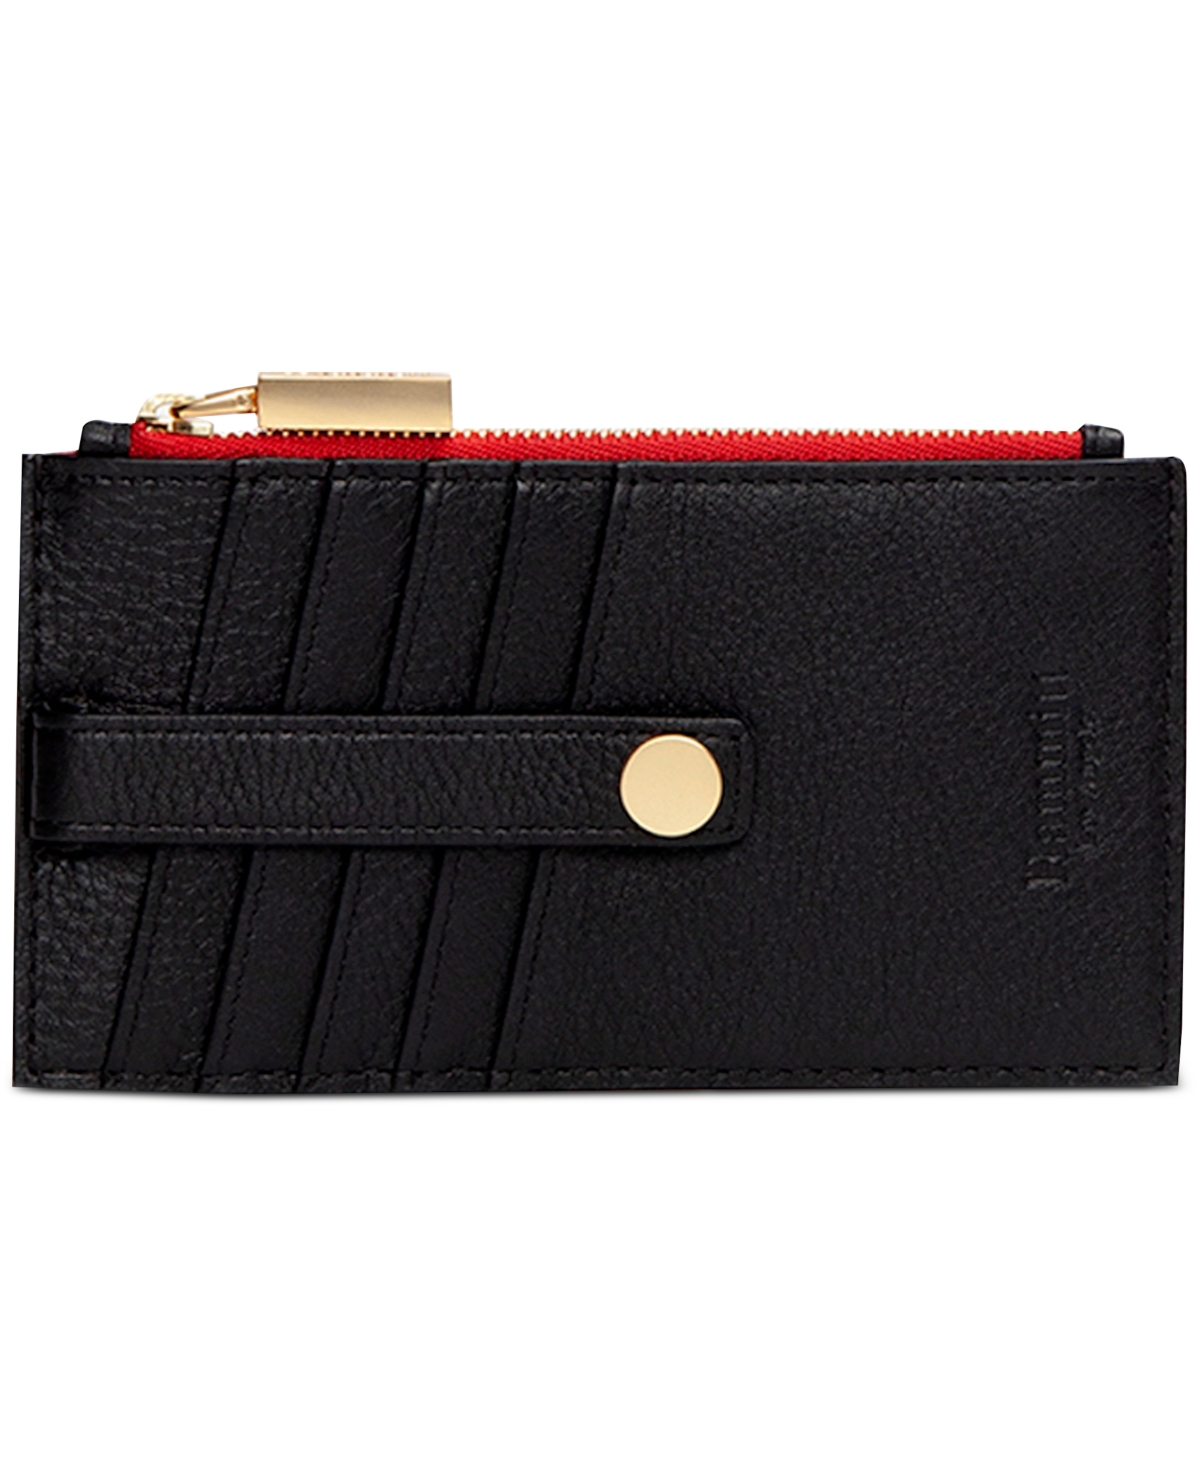 Hammitt 210 West Leather Cardholder In Black Brushed Gold Red Zip